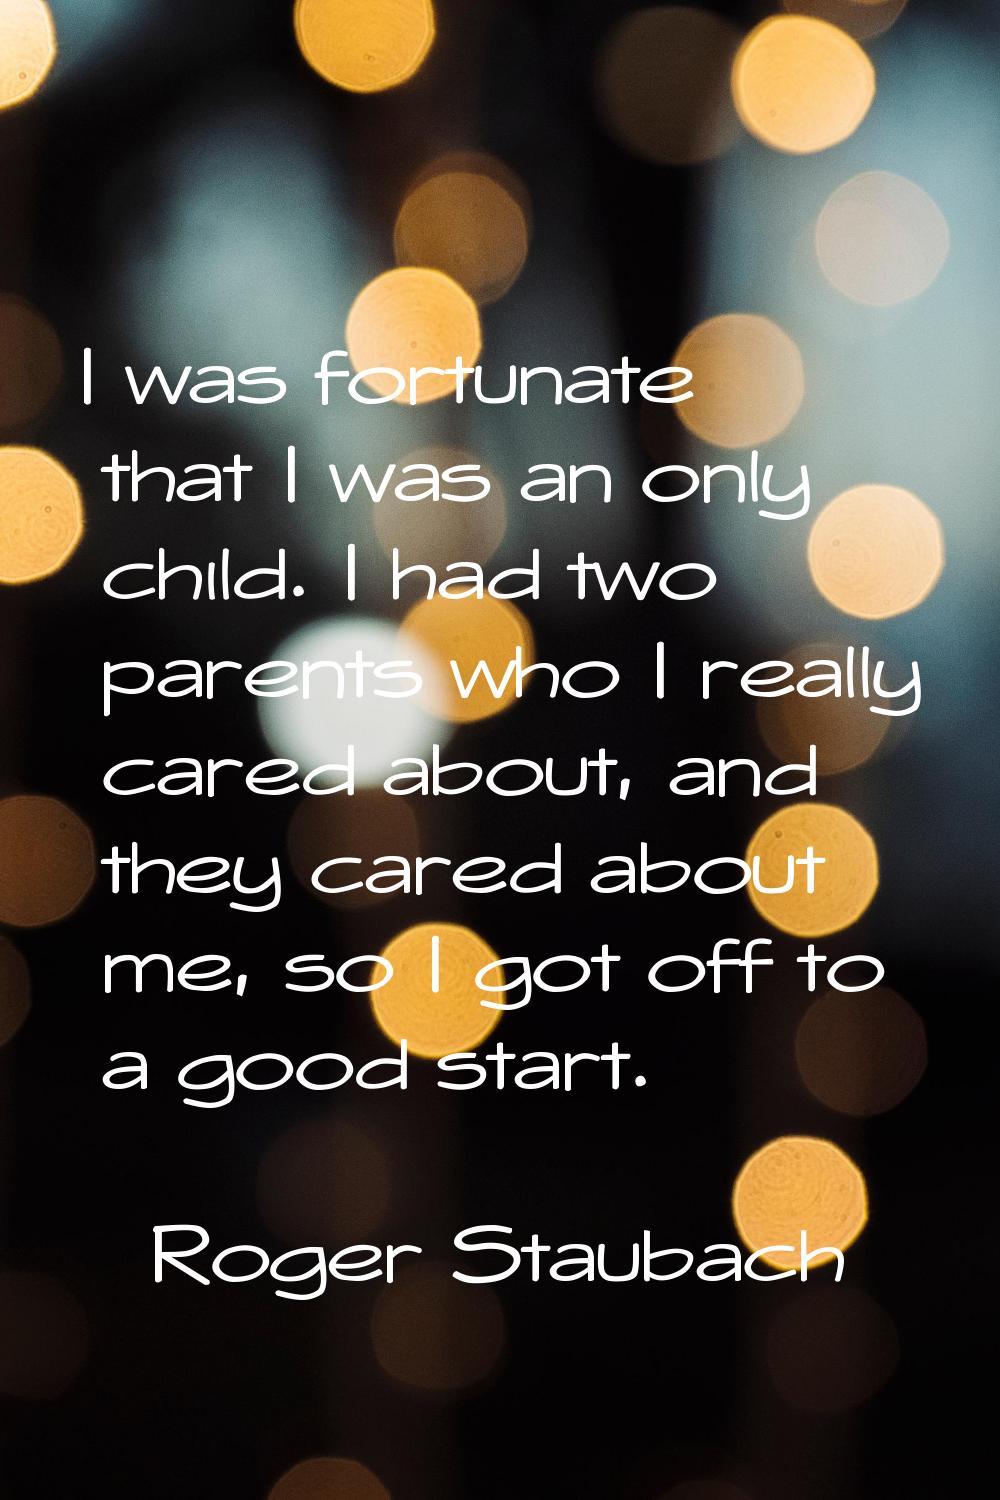 I was fortunate that I was an only child. I had two parents who I really cared about, and they care